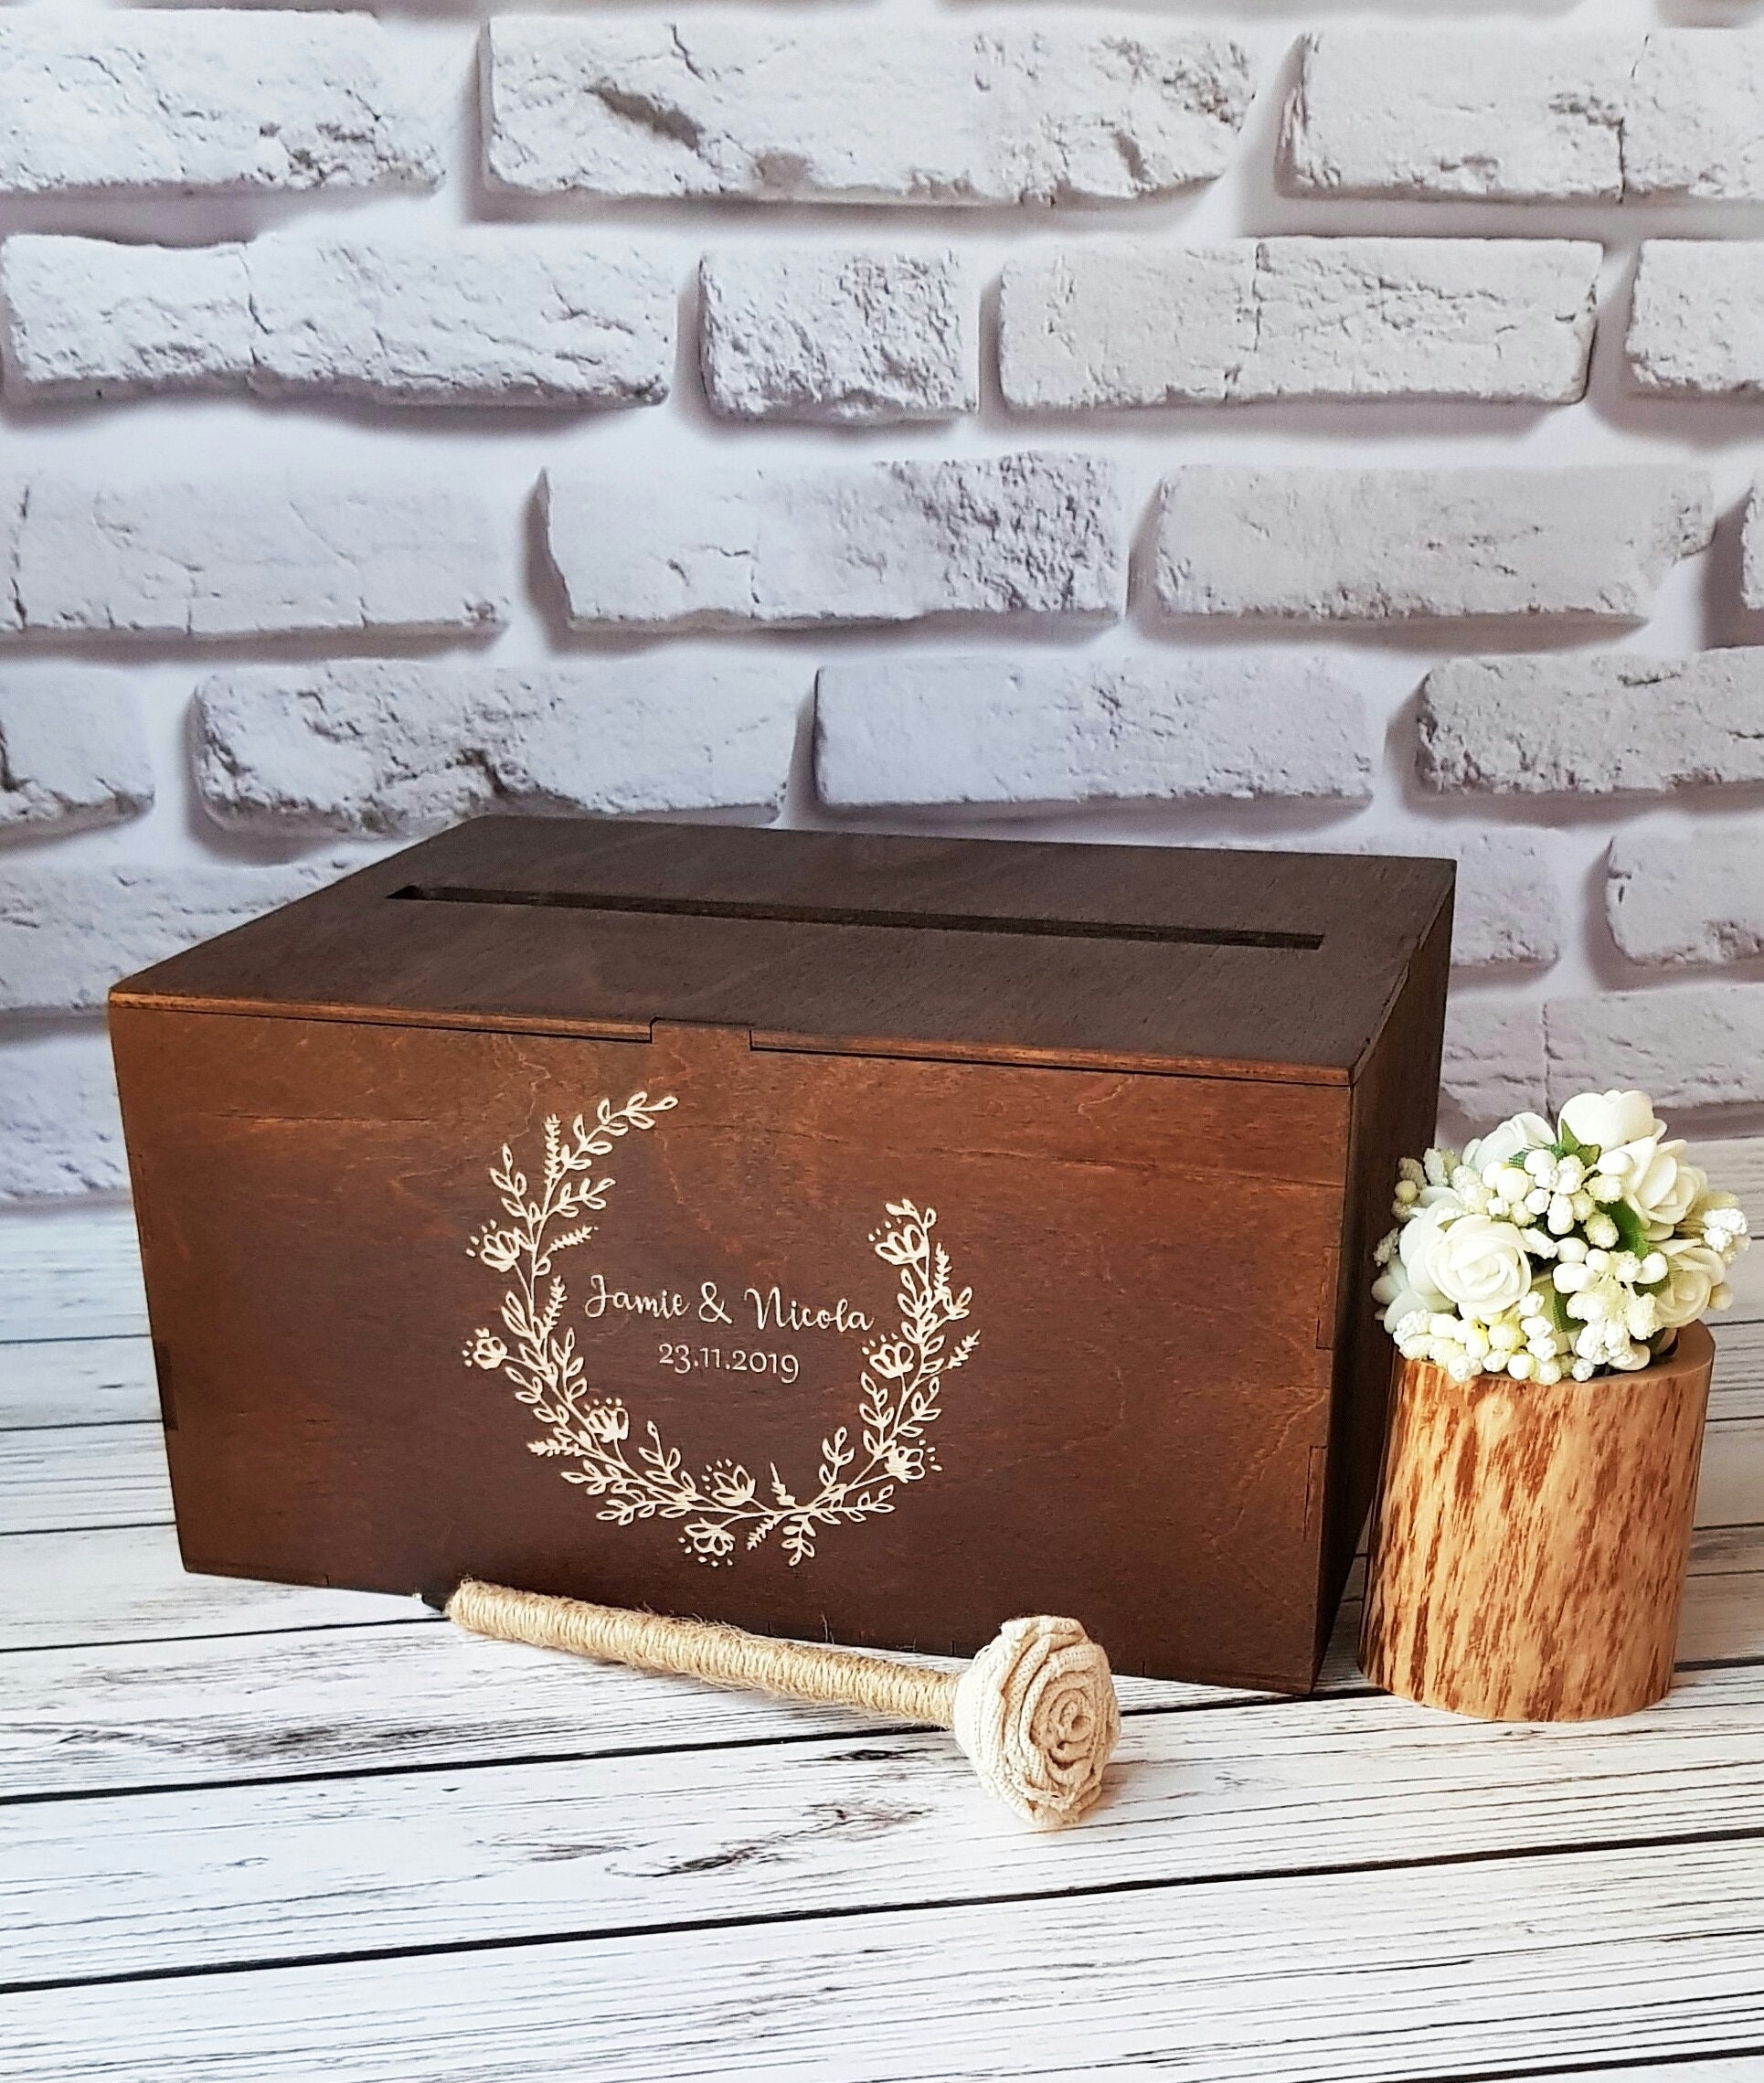 GLM Wedding Card Box with Lock | Up to 300 Cards | DIY Rustic Wooden Design Gift Card Holder | Perfect for Wedding Reception, Shower, Anniversary